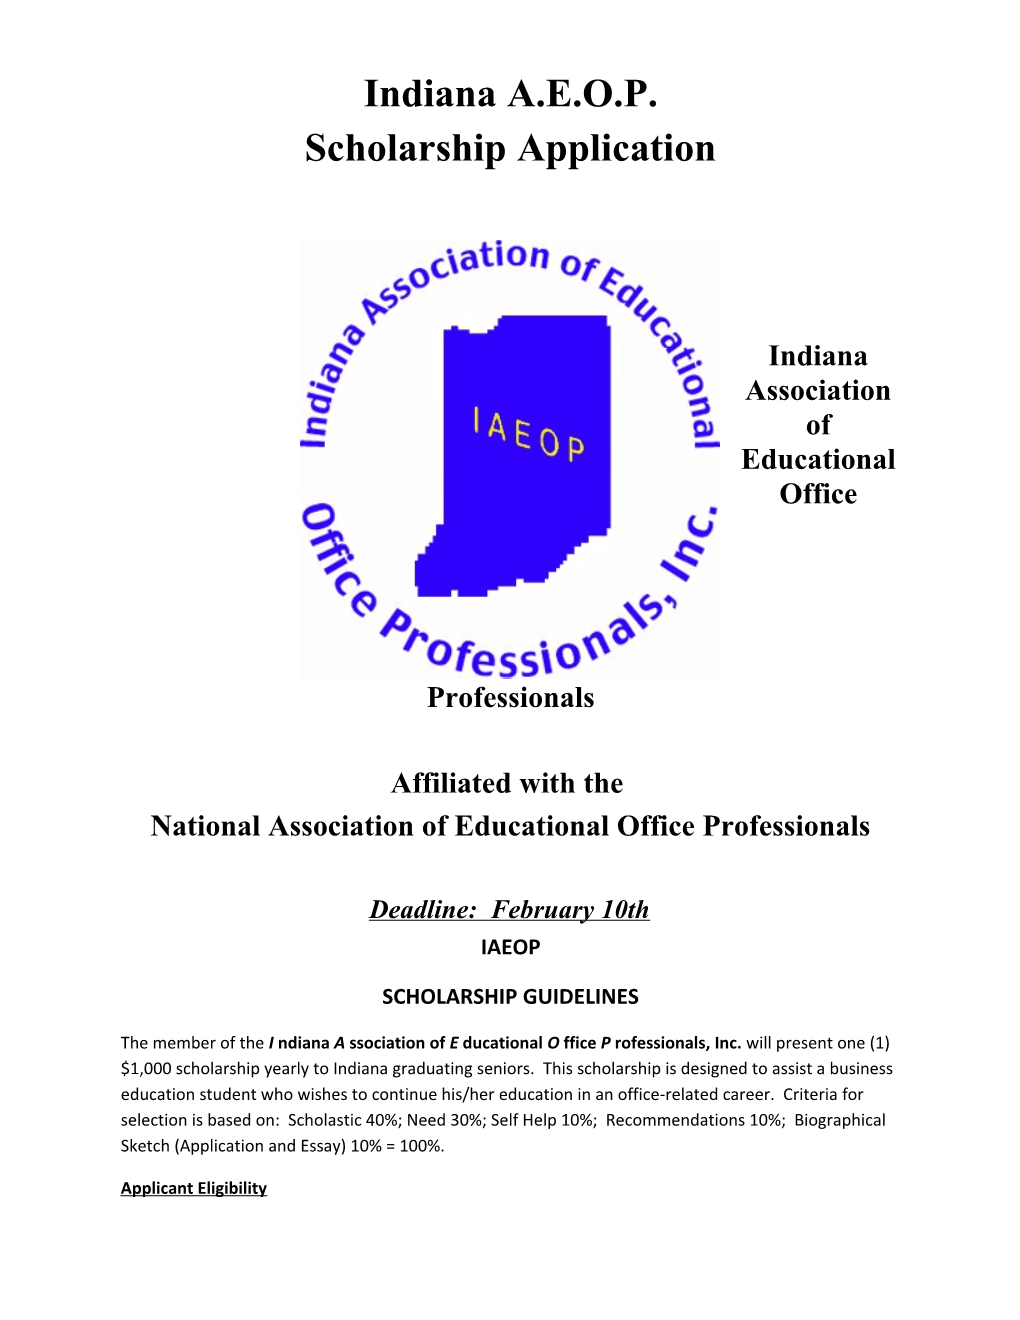 Indiana Association of Educational Office Professionals